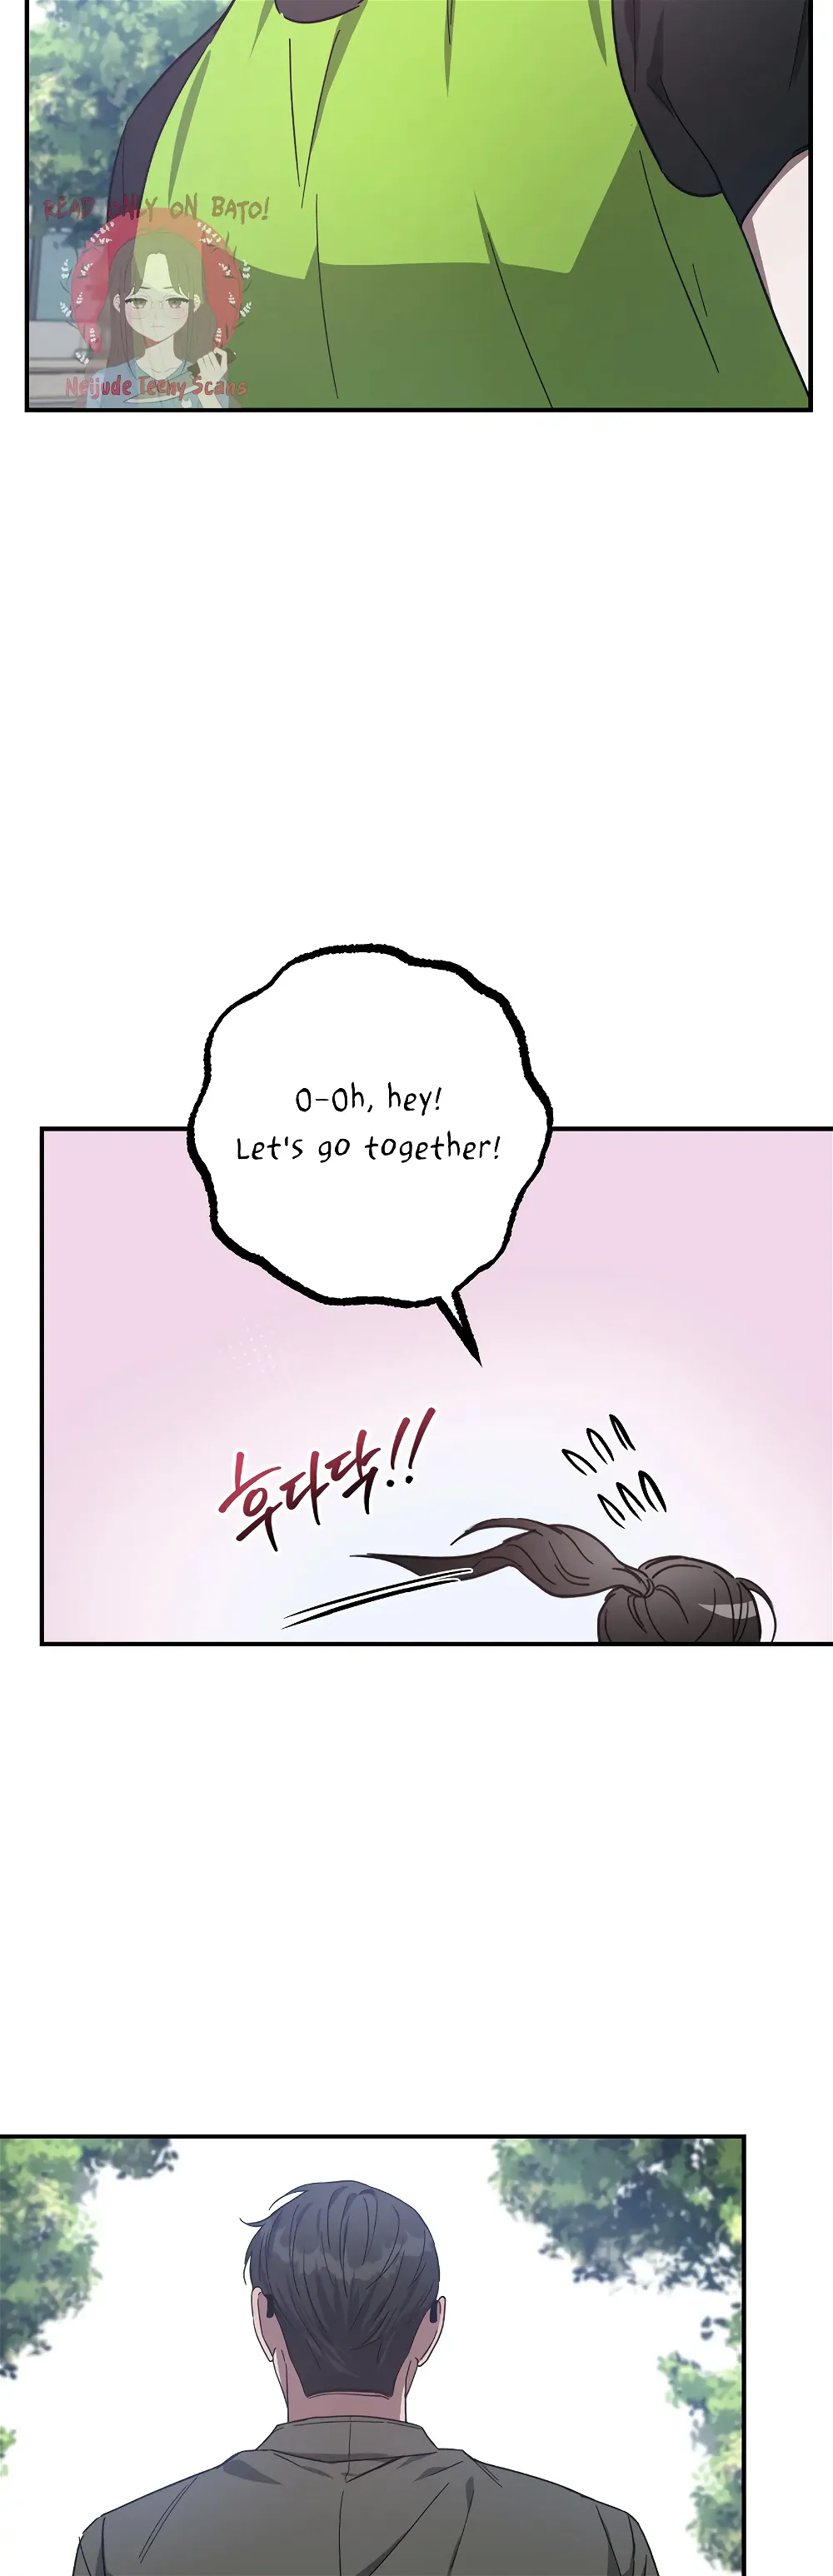 Mijeong’s Relationships chapter 17 - Page 19